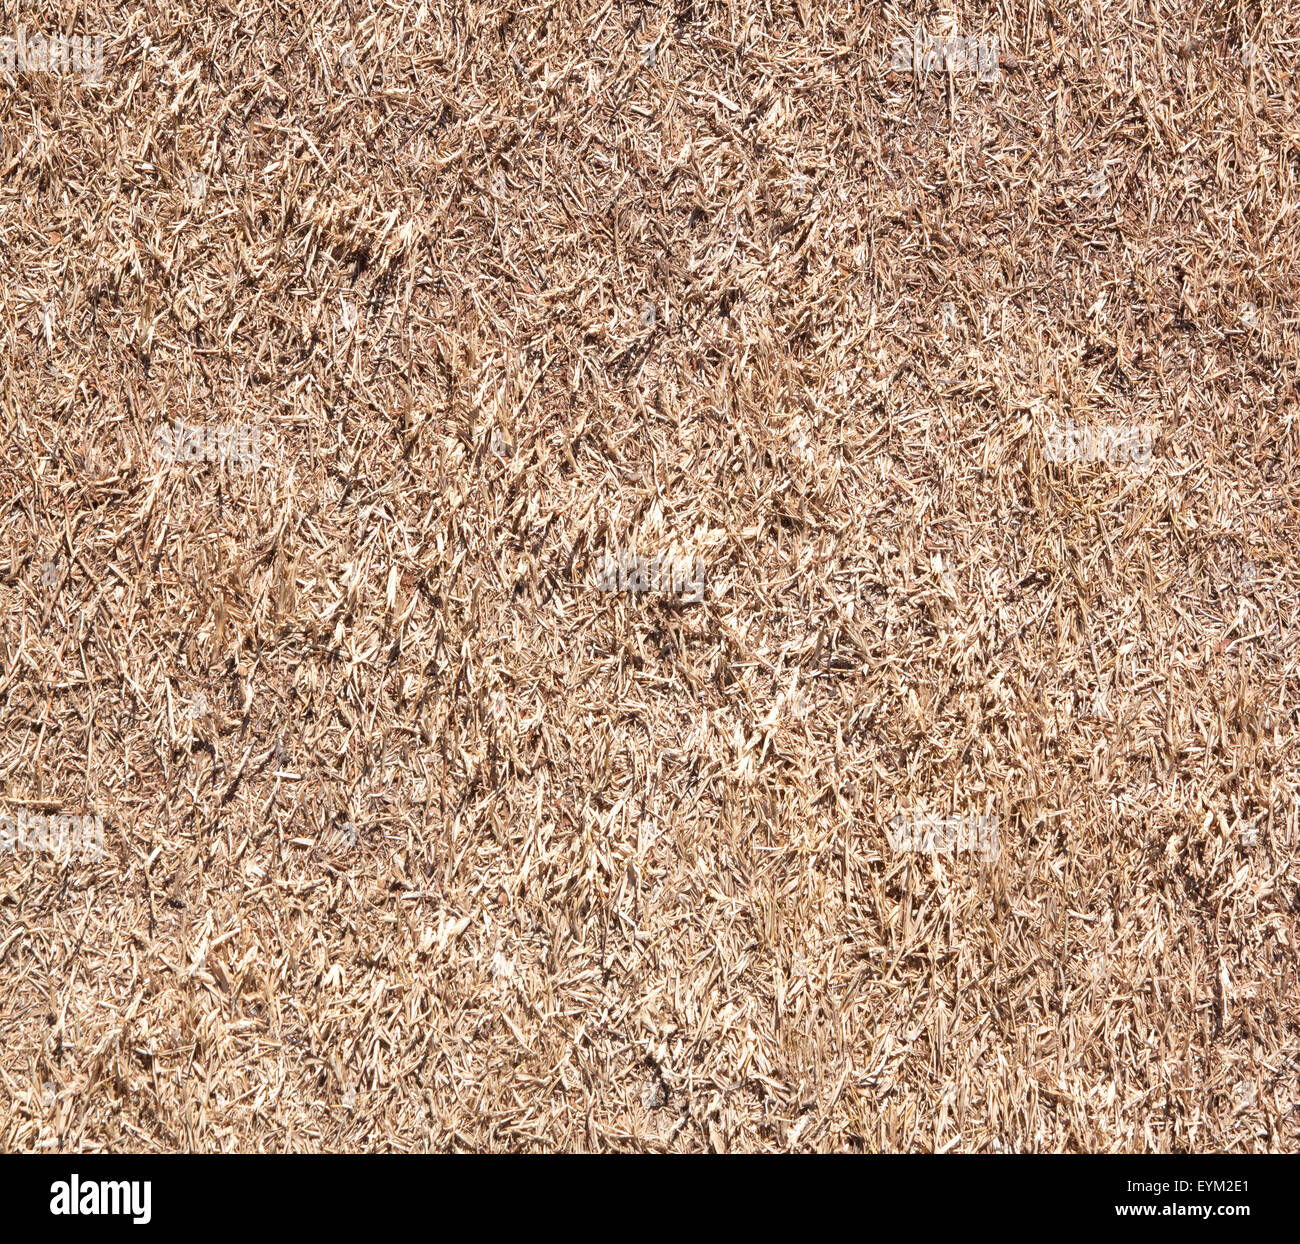 Dead grass background brown dry grass, dead. Stock Photo